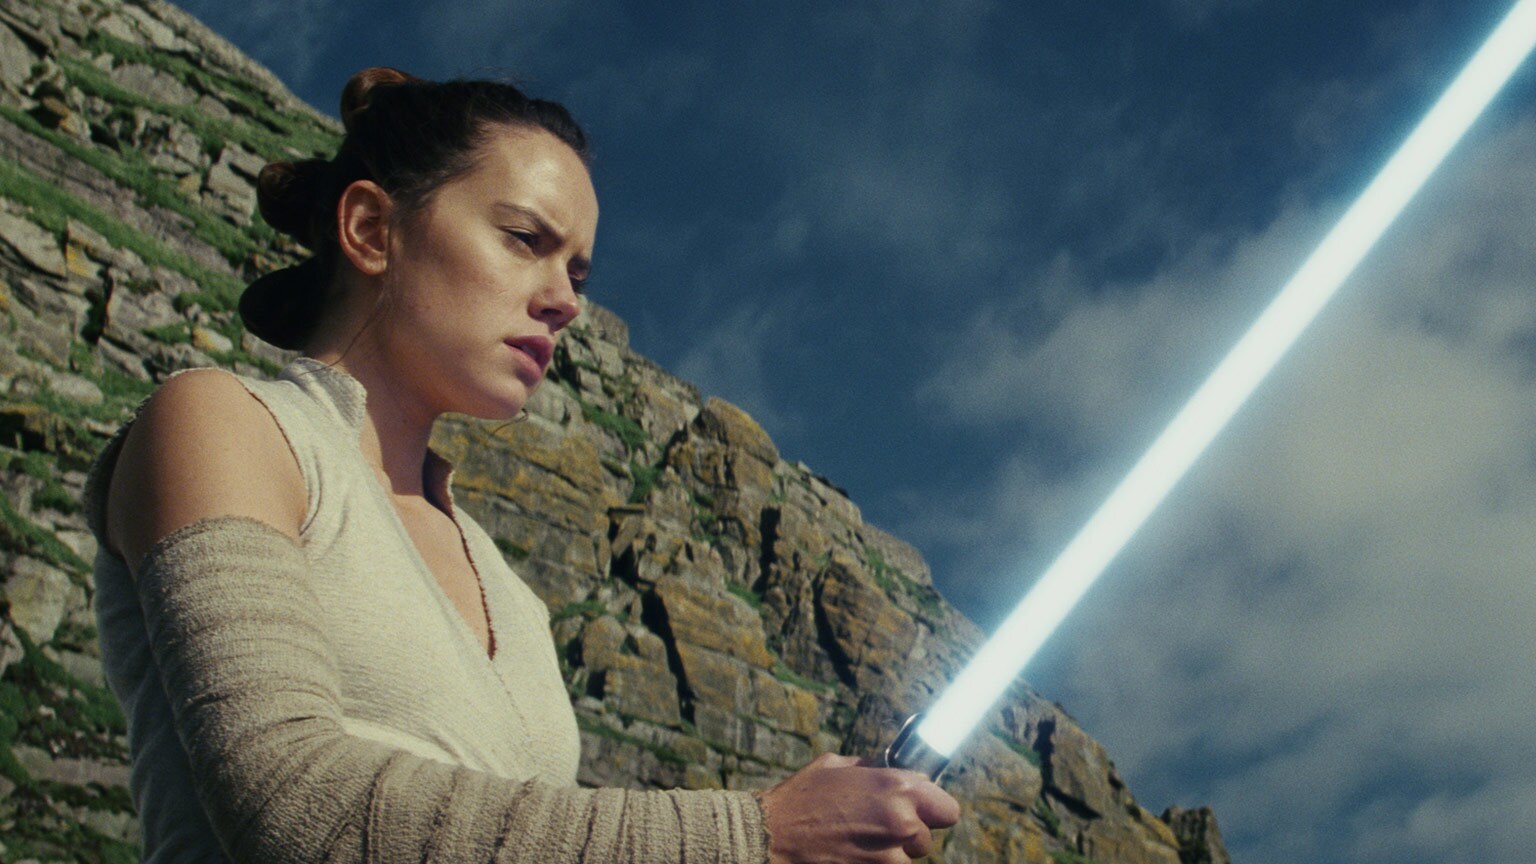 Poll: What is Your Favorite Moment in the Star Wars: The Last Jedi Trailer?